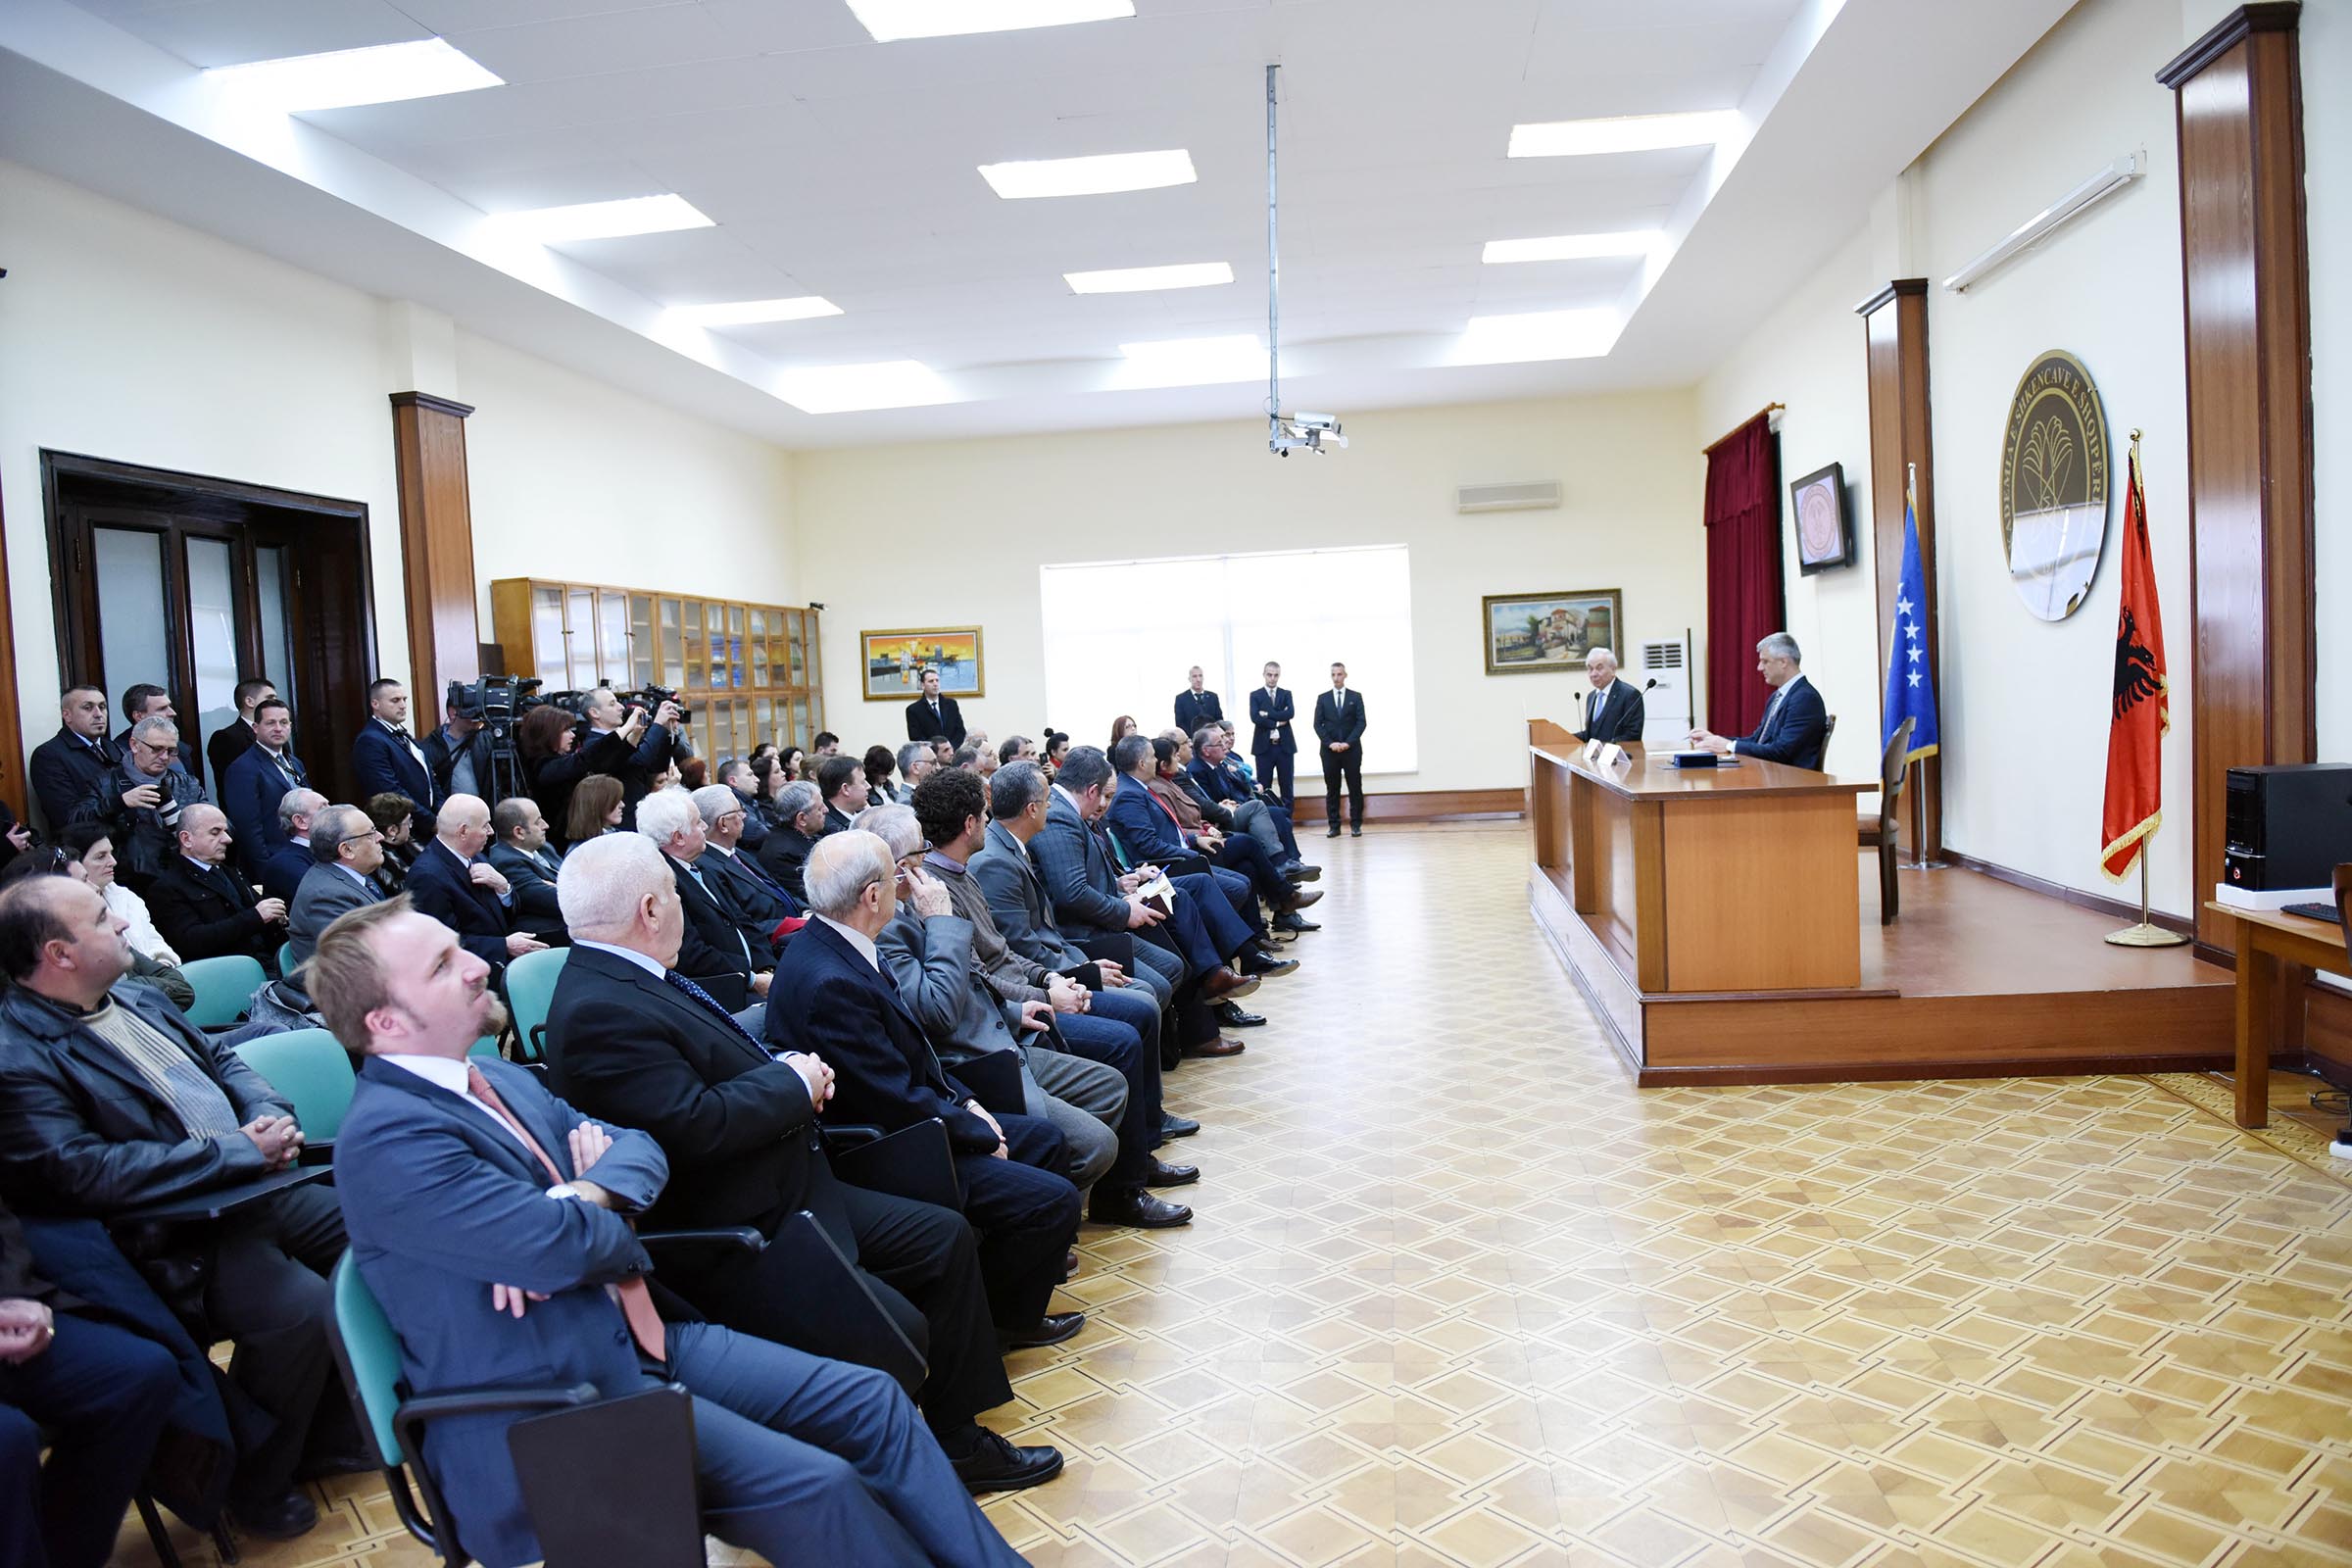 President Thaçi is honored with the medal “Honor of the Academy” by the Academy of Sciences of Albania